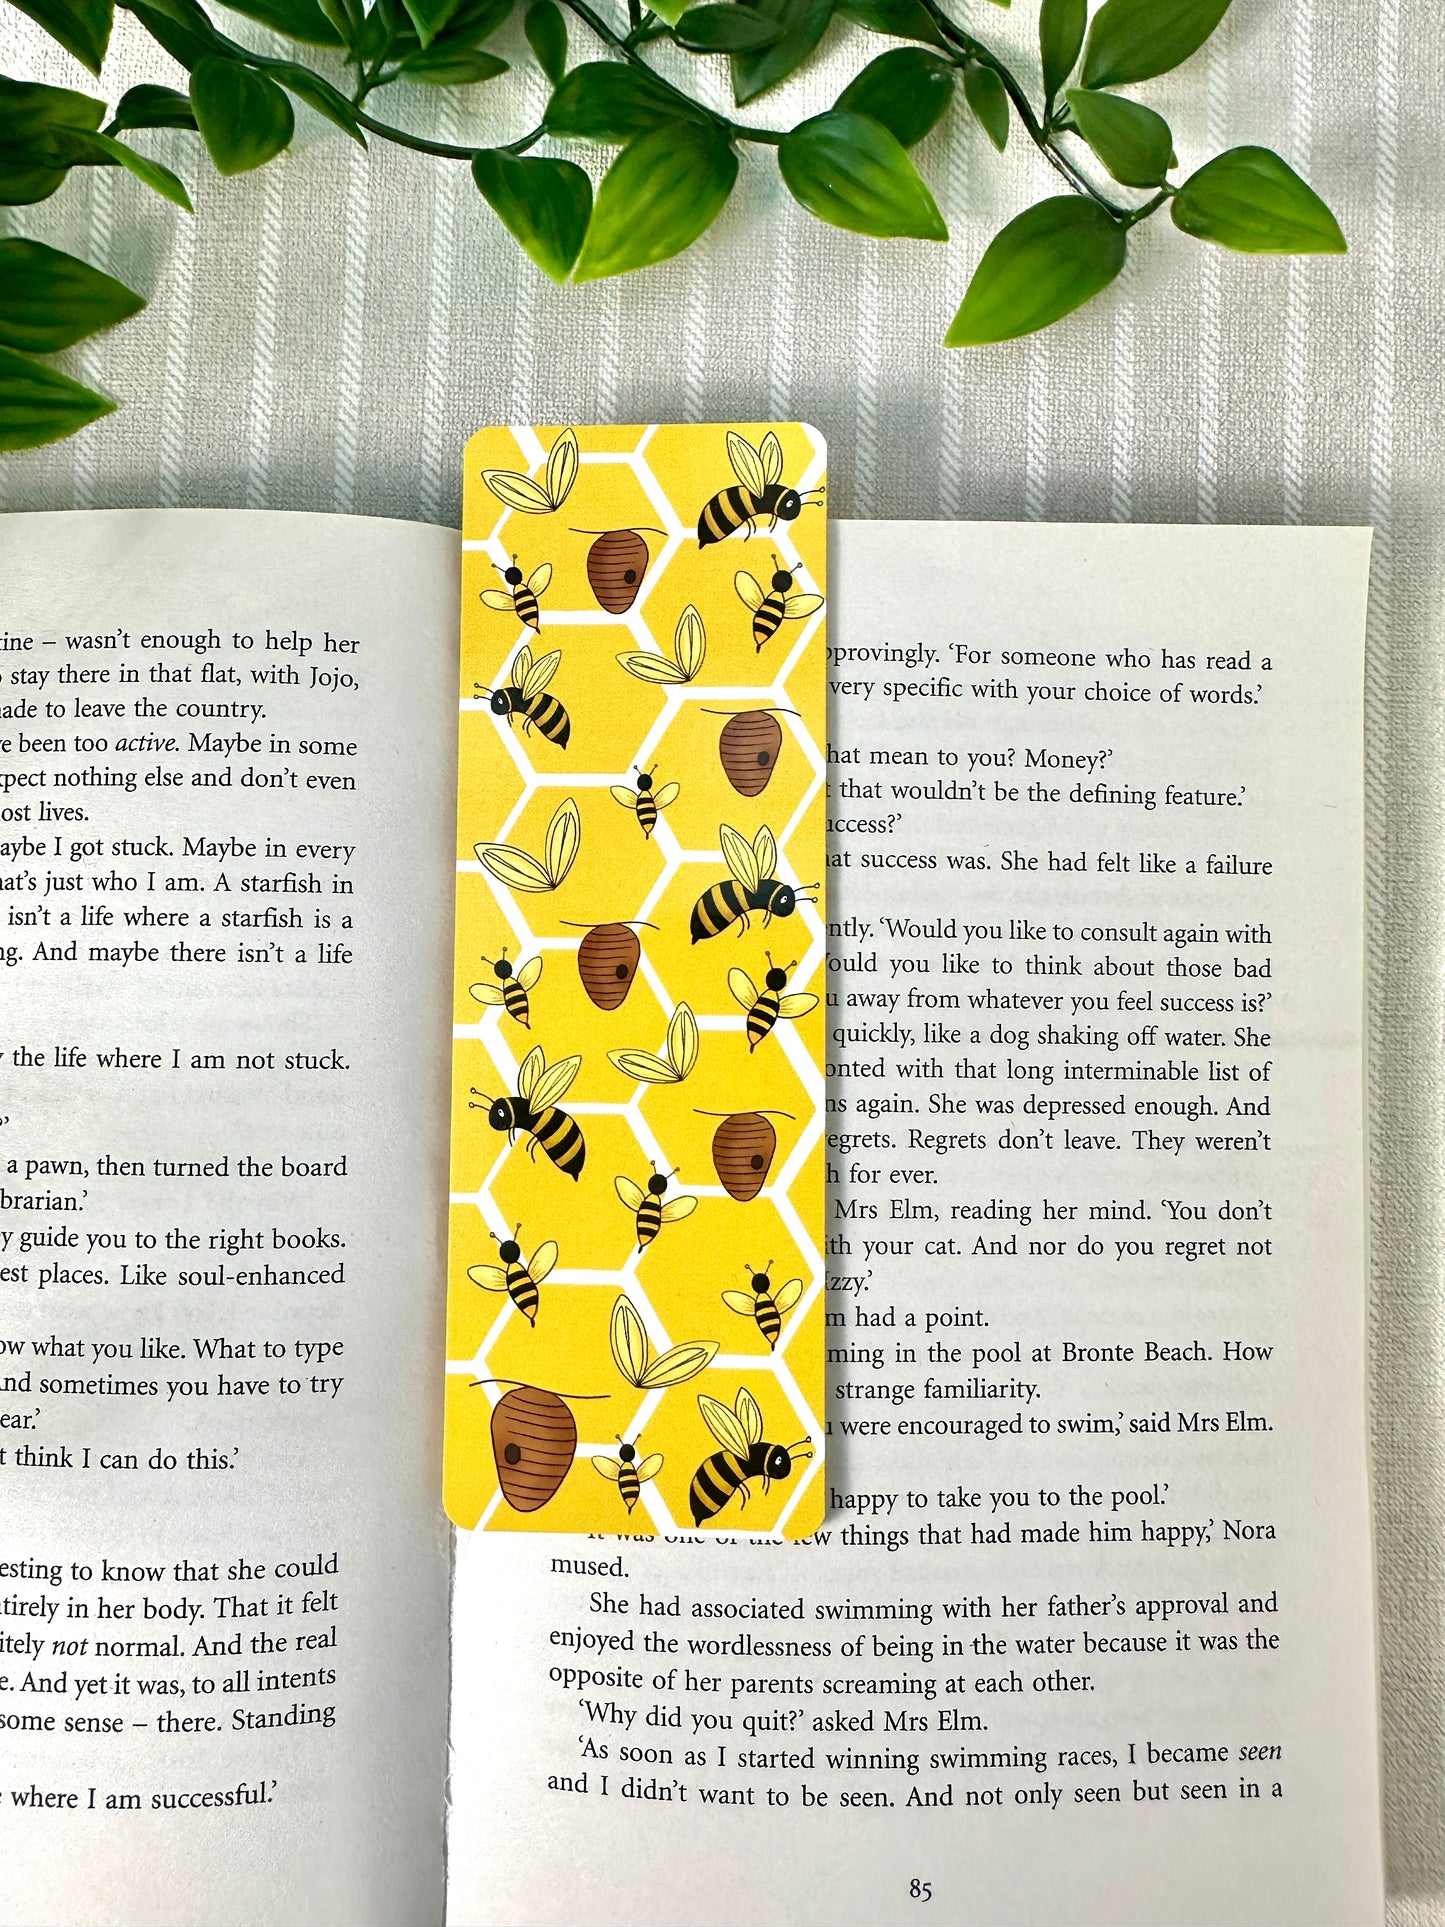 bumble bee, bee yourself traditional bookmark curved edge, bright yellow on book